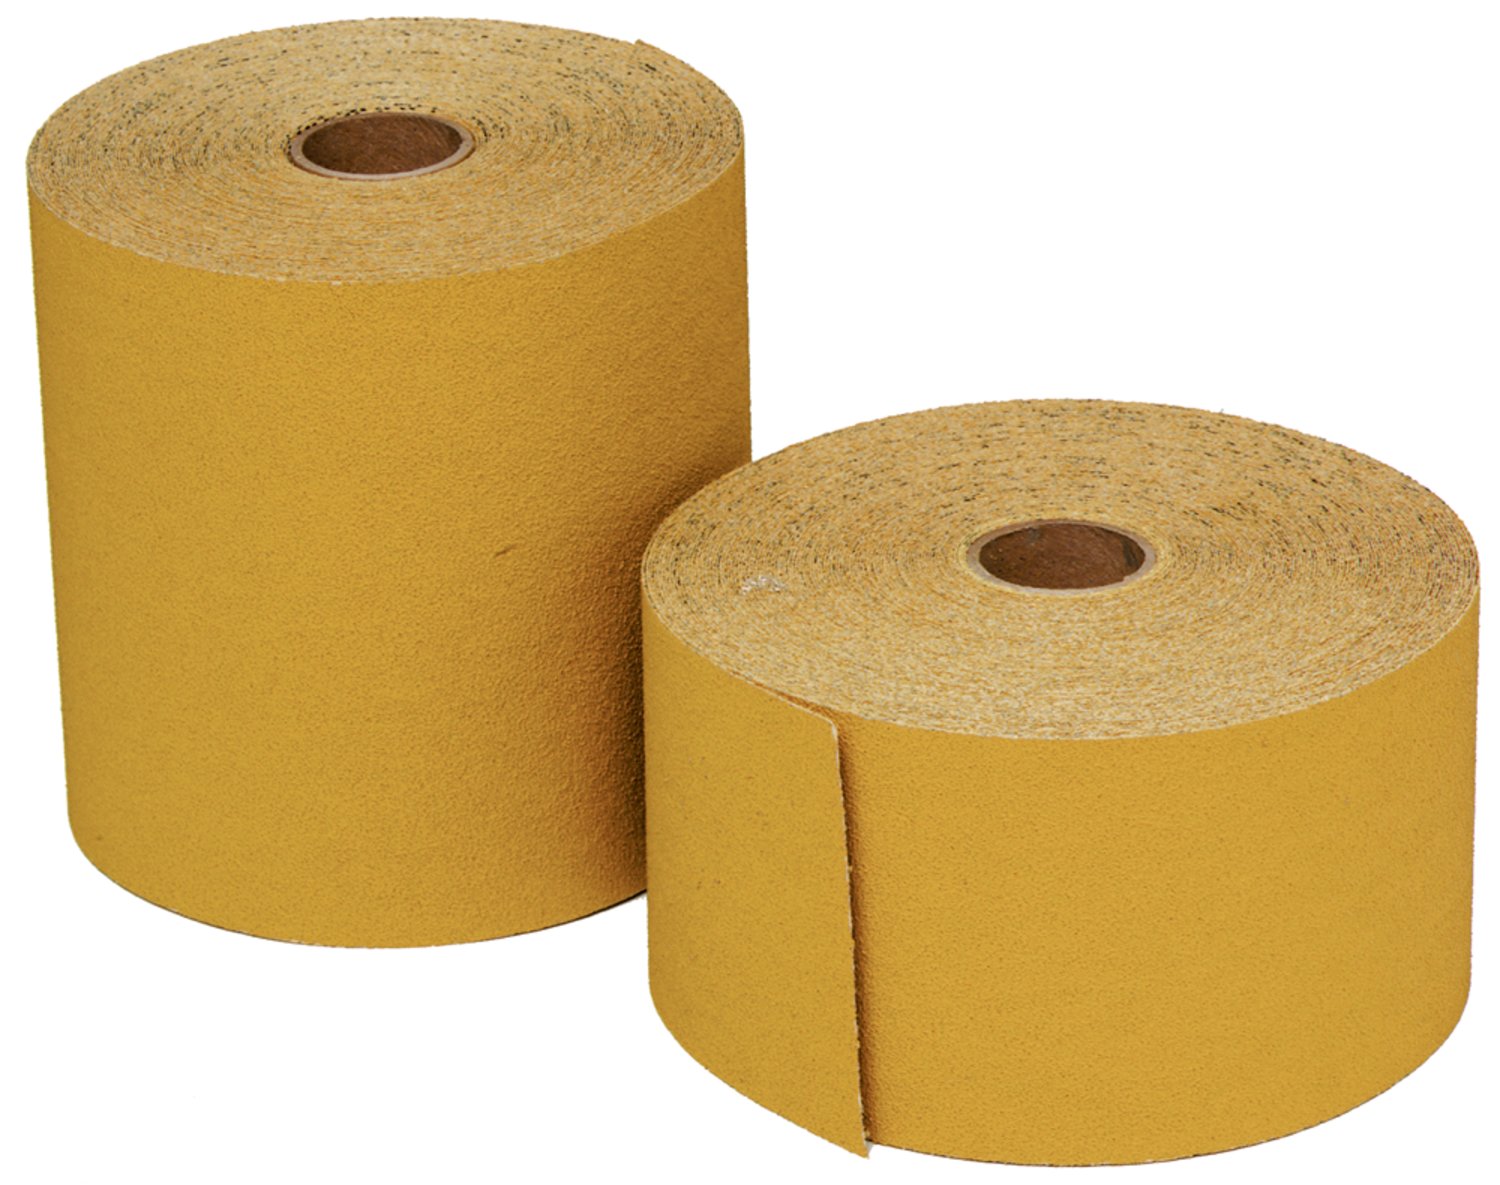 7100093560 - 3M Stikit Gold Paper Roll 216U, P360 F-weight, Config